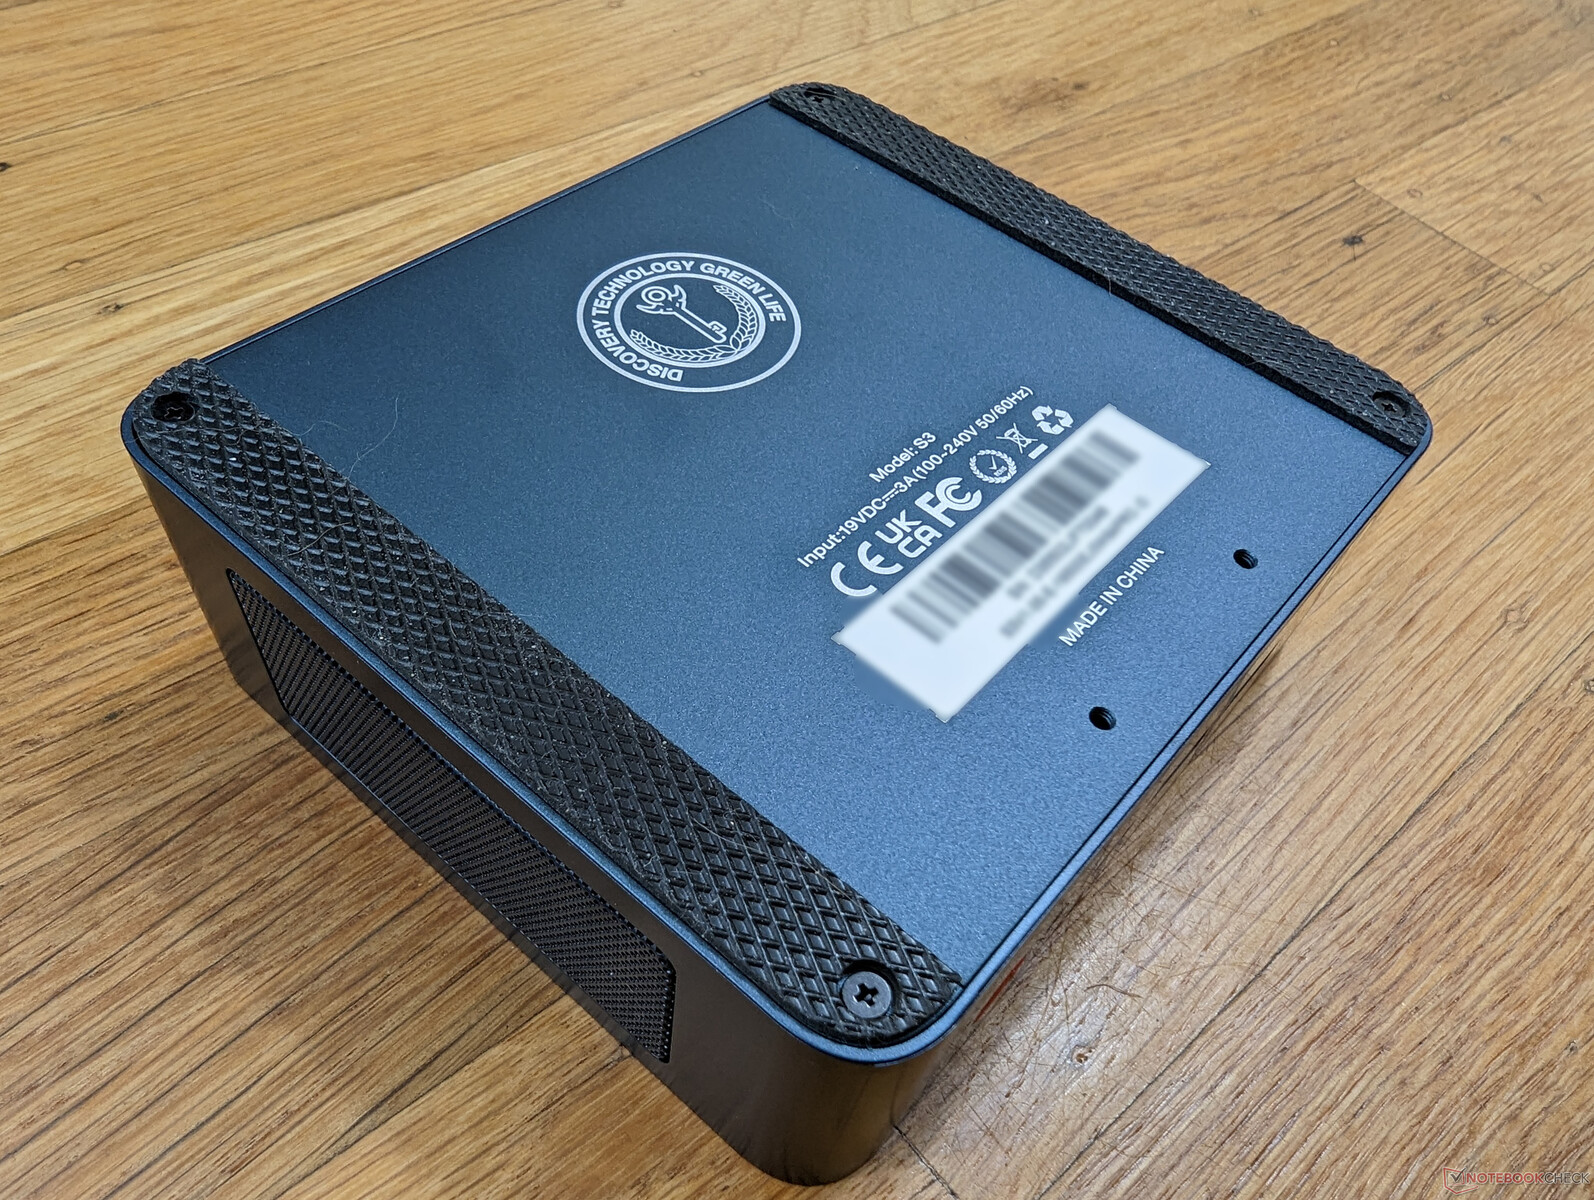 Almost Nails ItTrigkey Green G3 Mini PC Review 